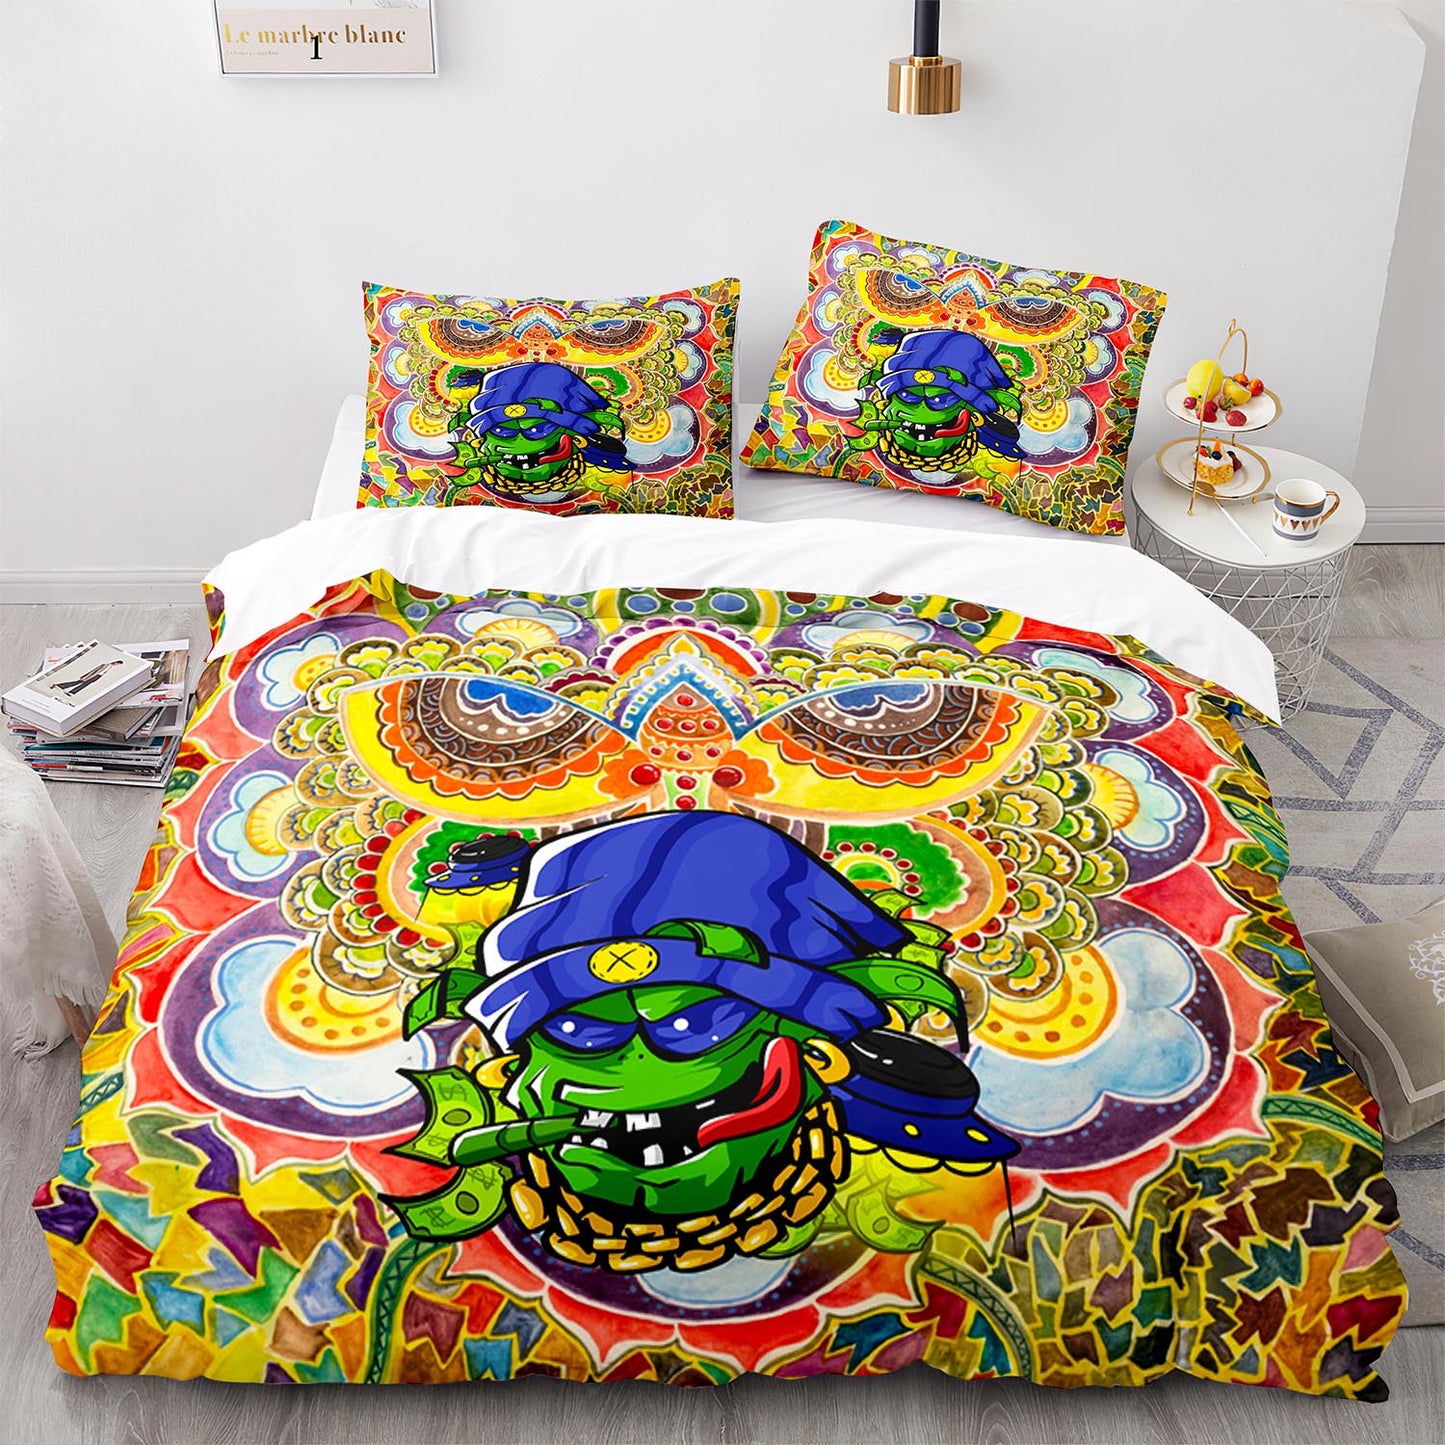 Cutom Duvet Cover Set Pattern Chic Comforter Cover King Size for Teens Adults Bedding Set with Pillowcases  WXR1007